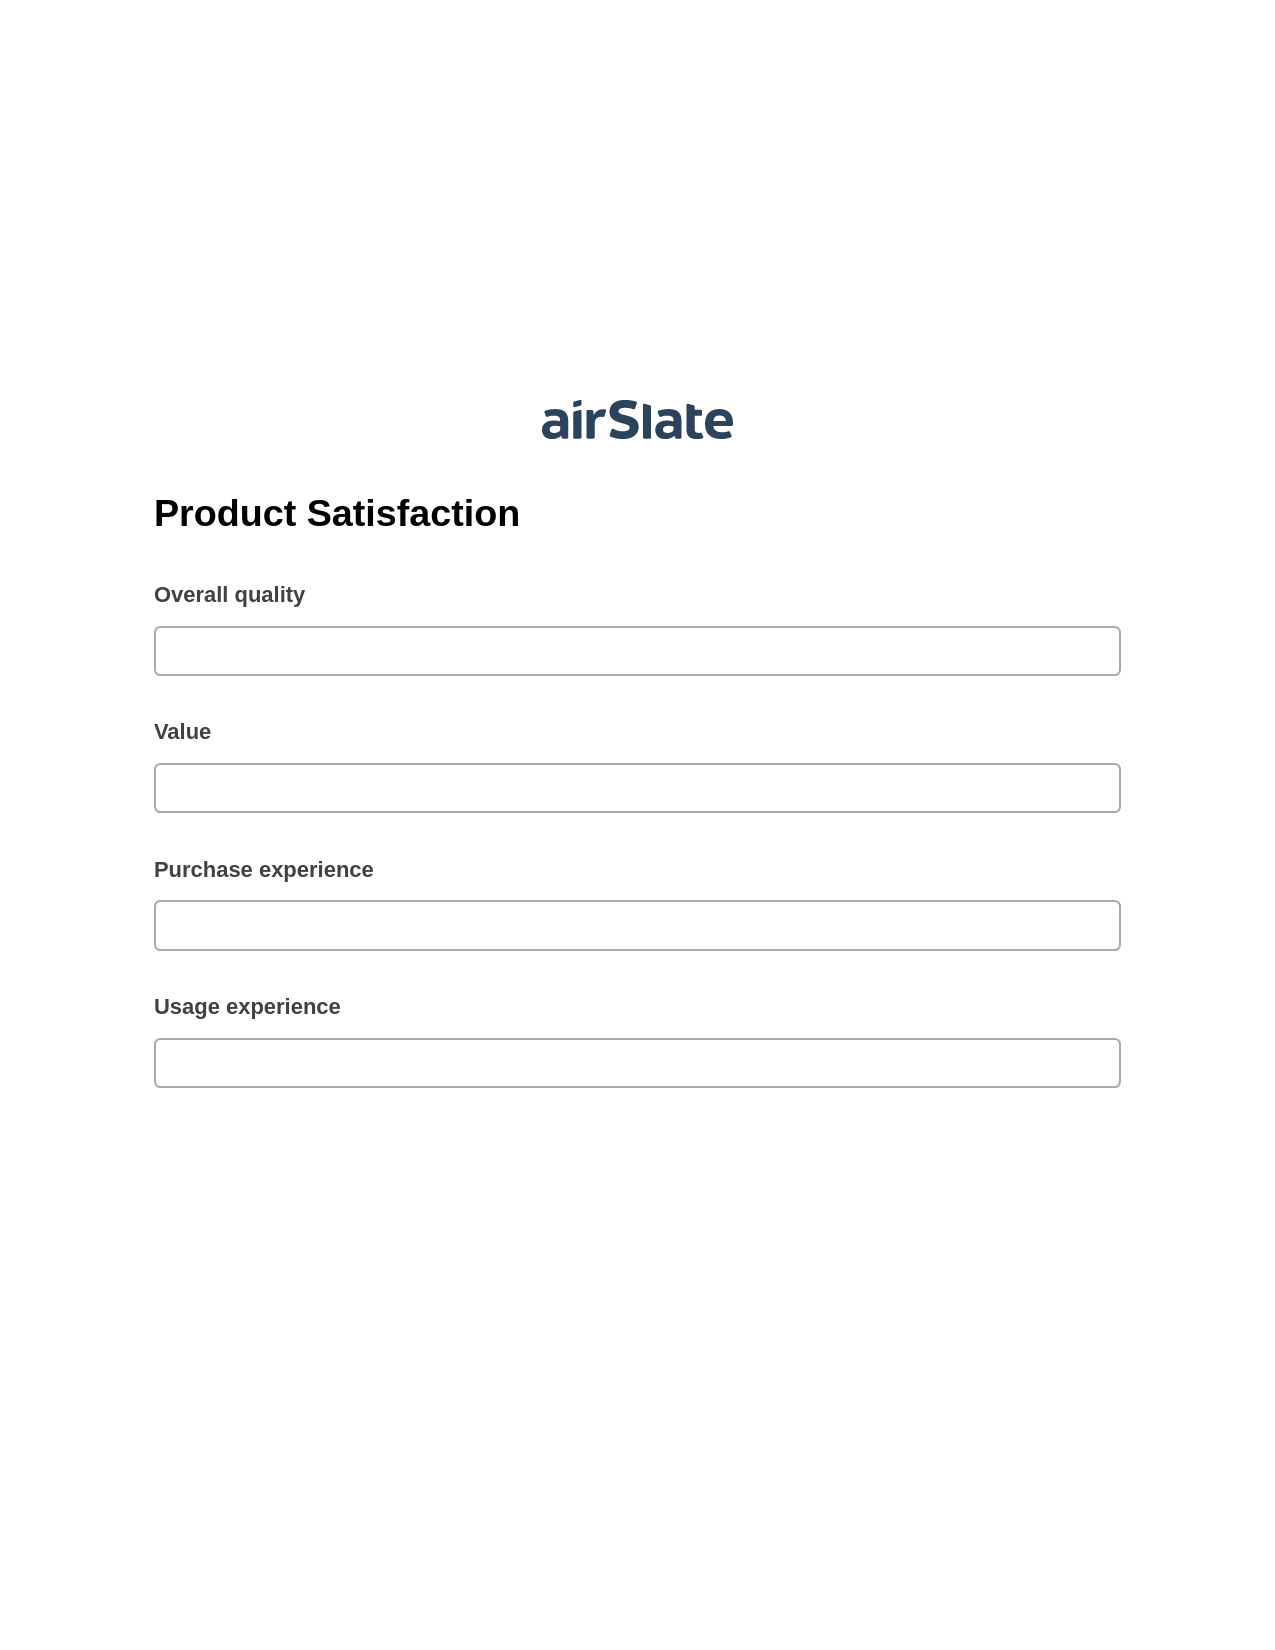 Multirole Product Satisfaction Pre-fill Slate from MS Dynamics 365 Records Bot, Export to MS Dynamics 365 Bot, Box Bot